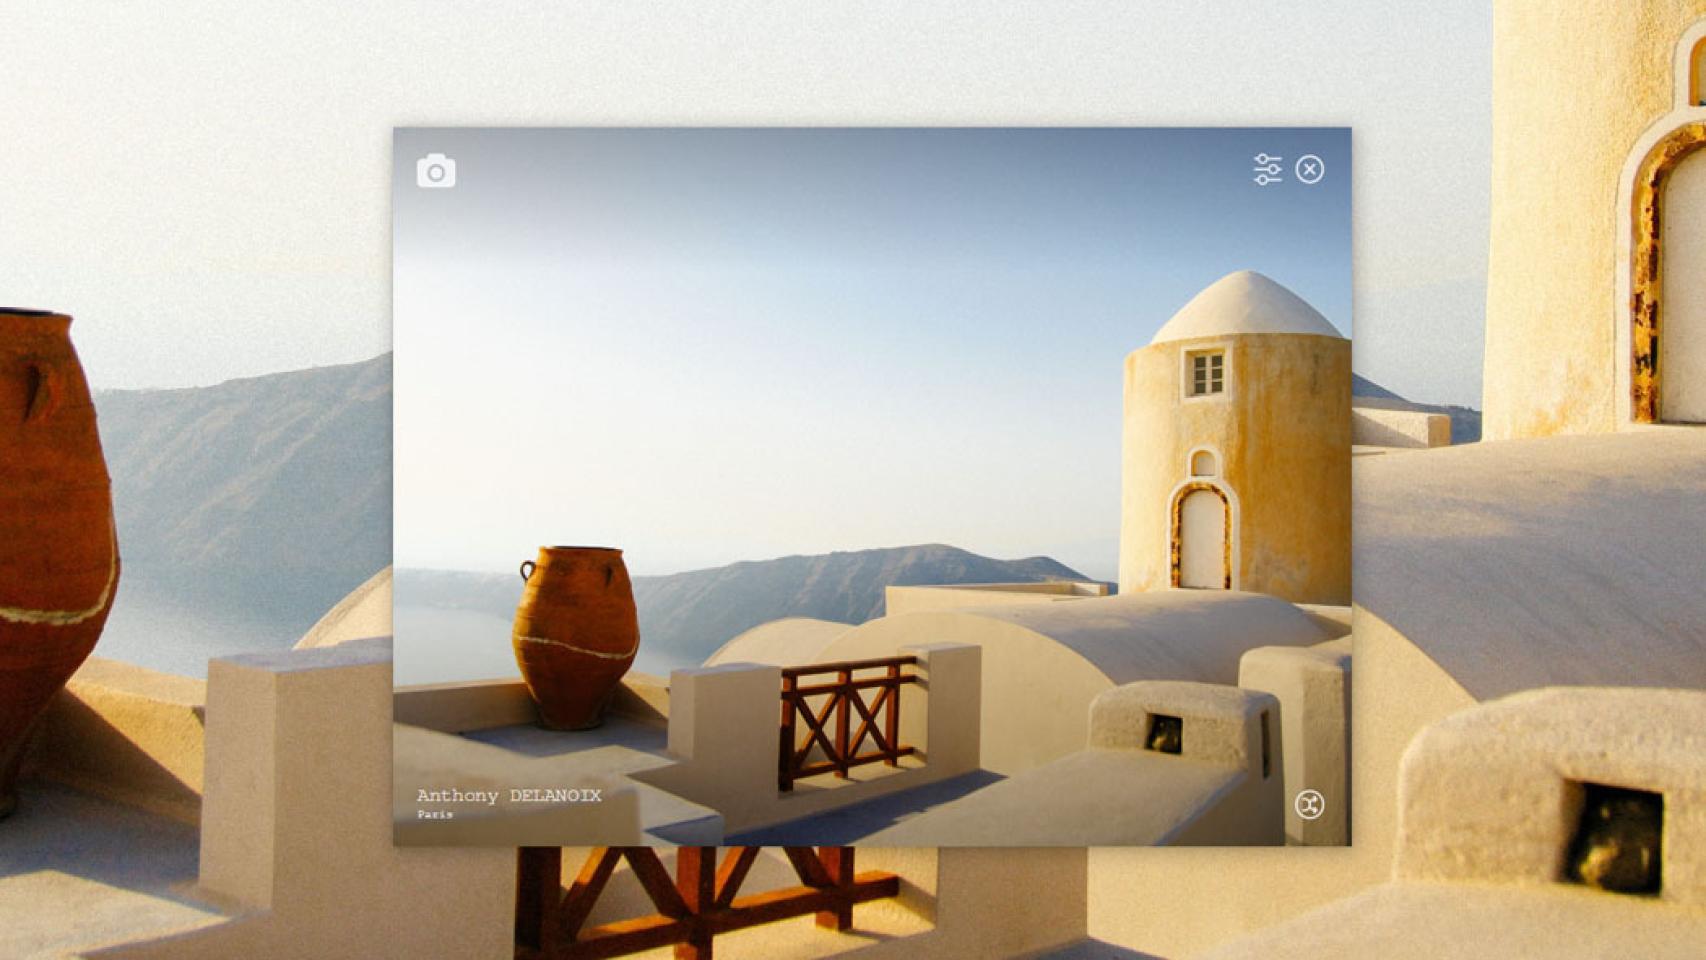 10 Tools that Automatically Download Stunning Images Everyday